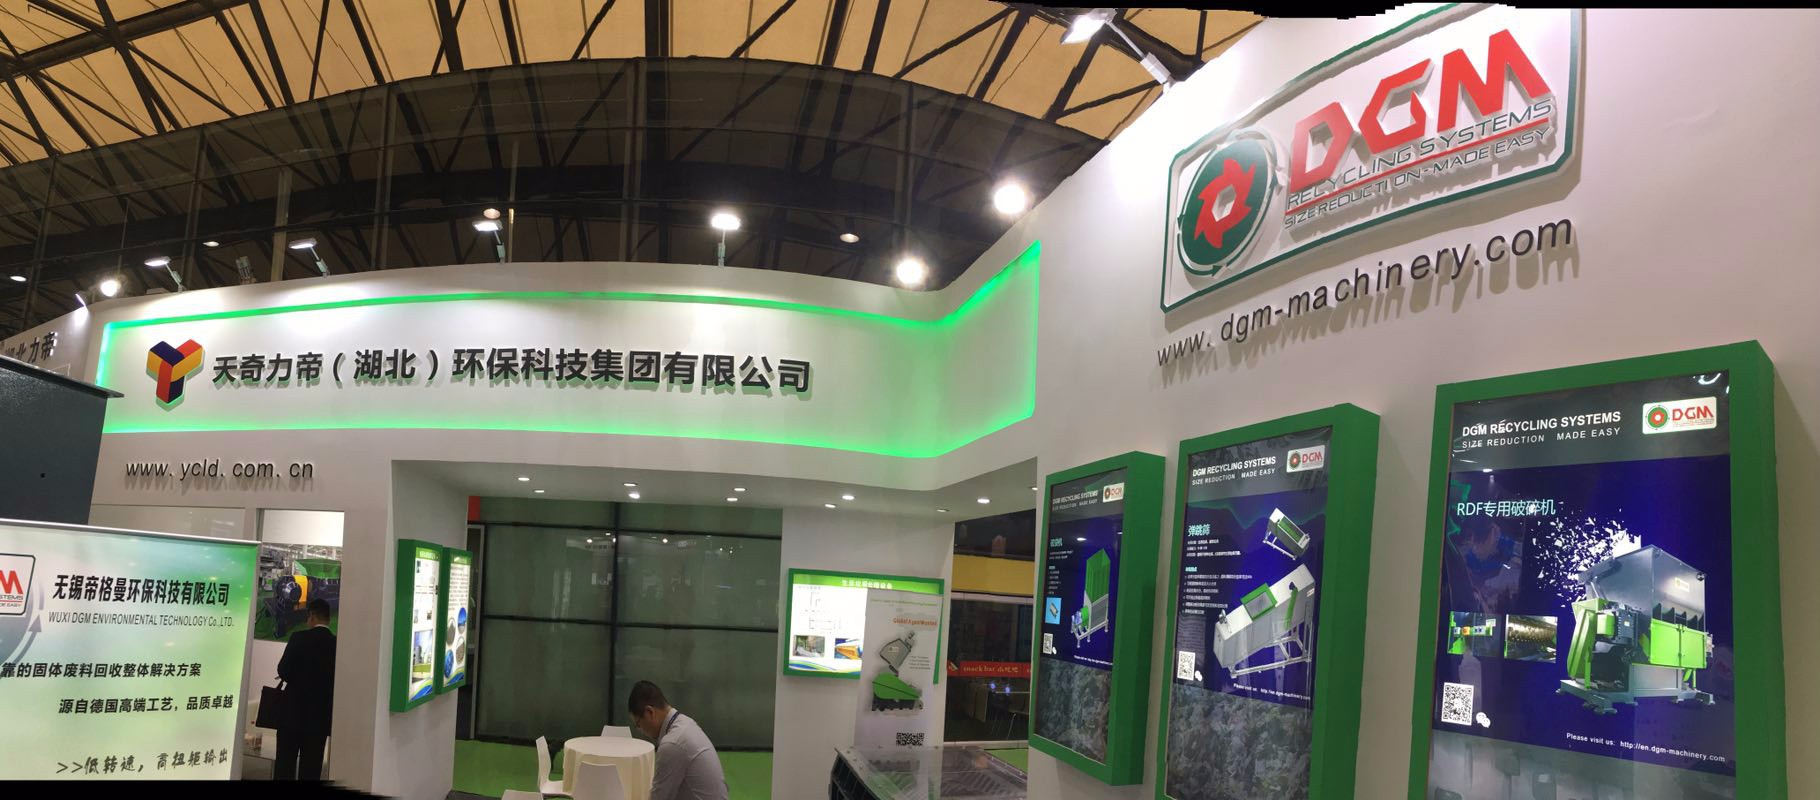 Group companies actively participated in IE expo China 2017